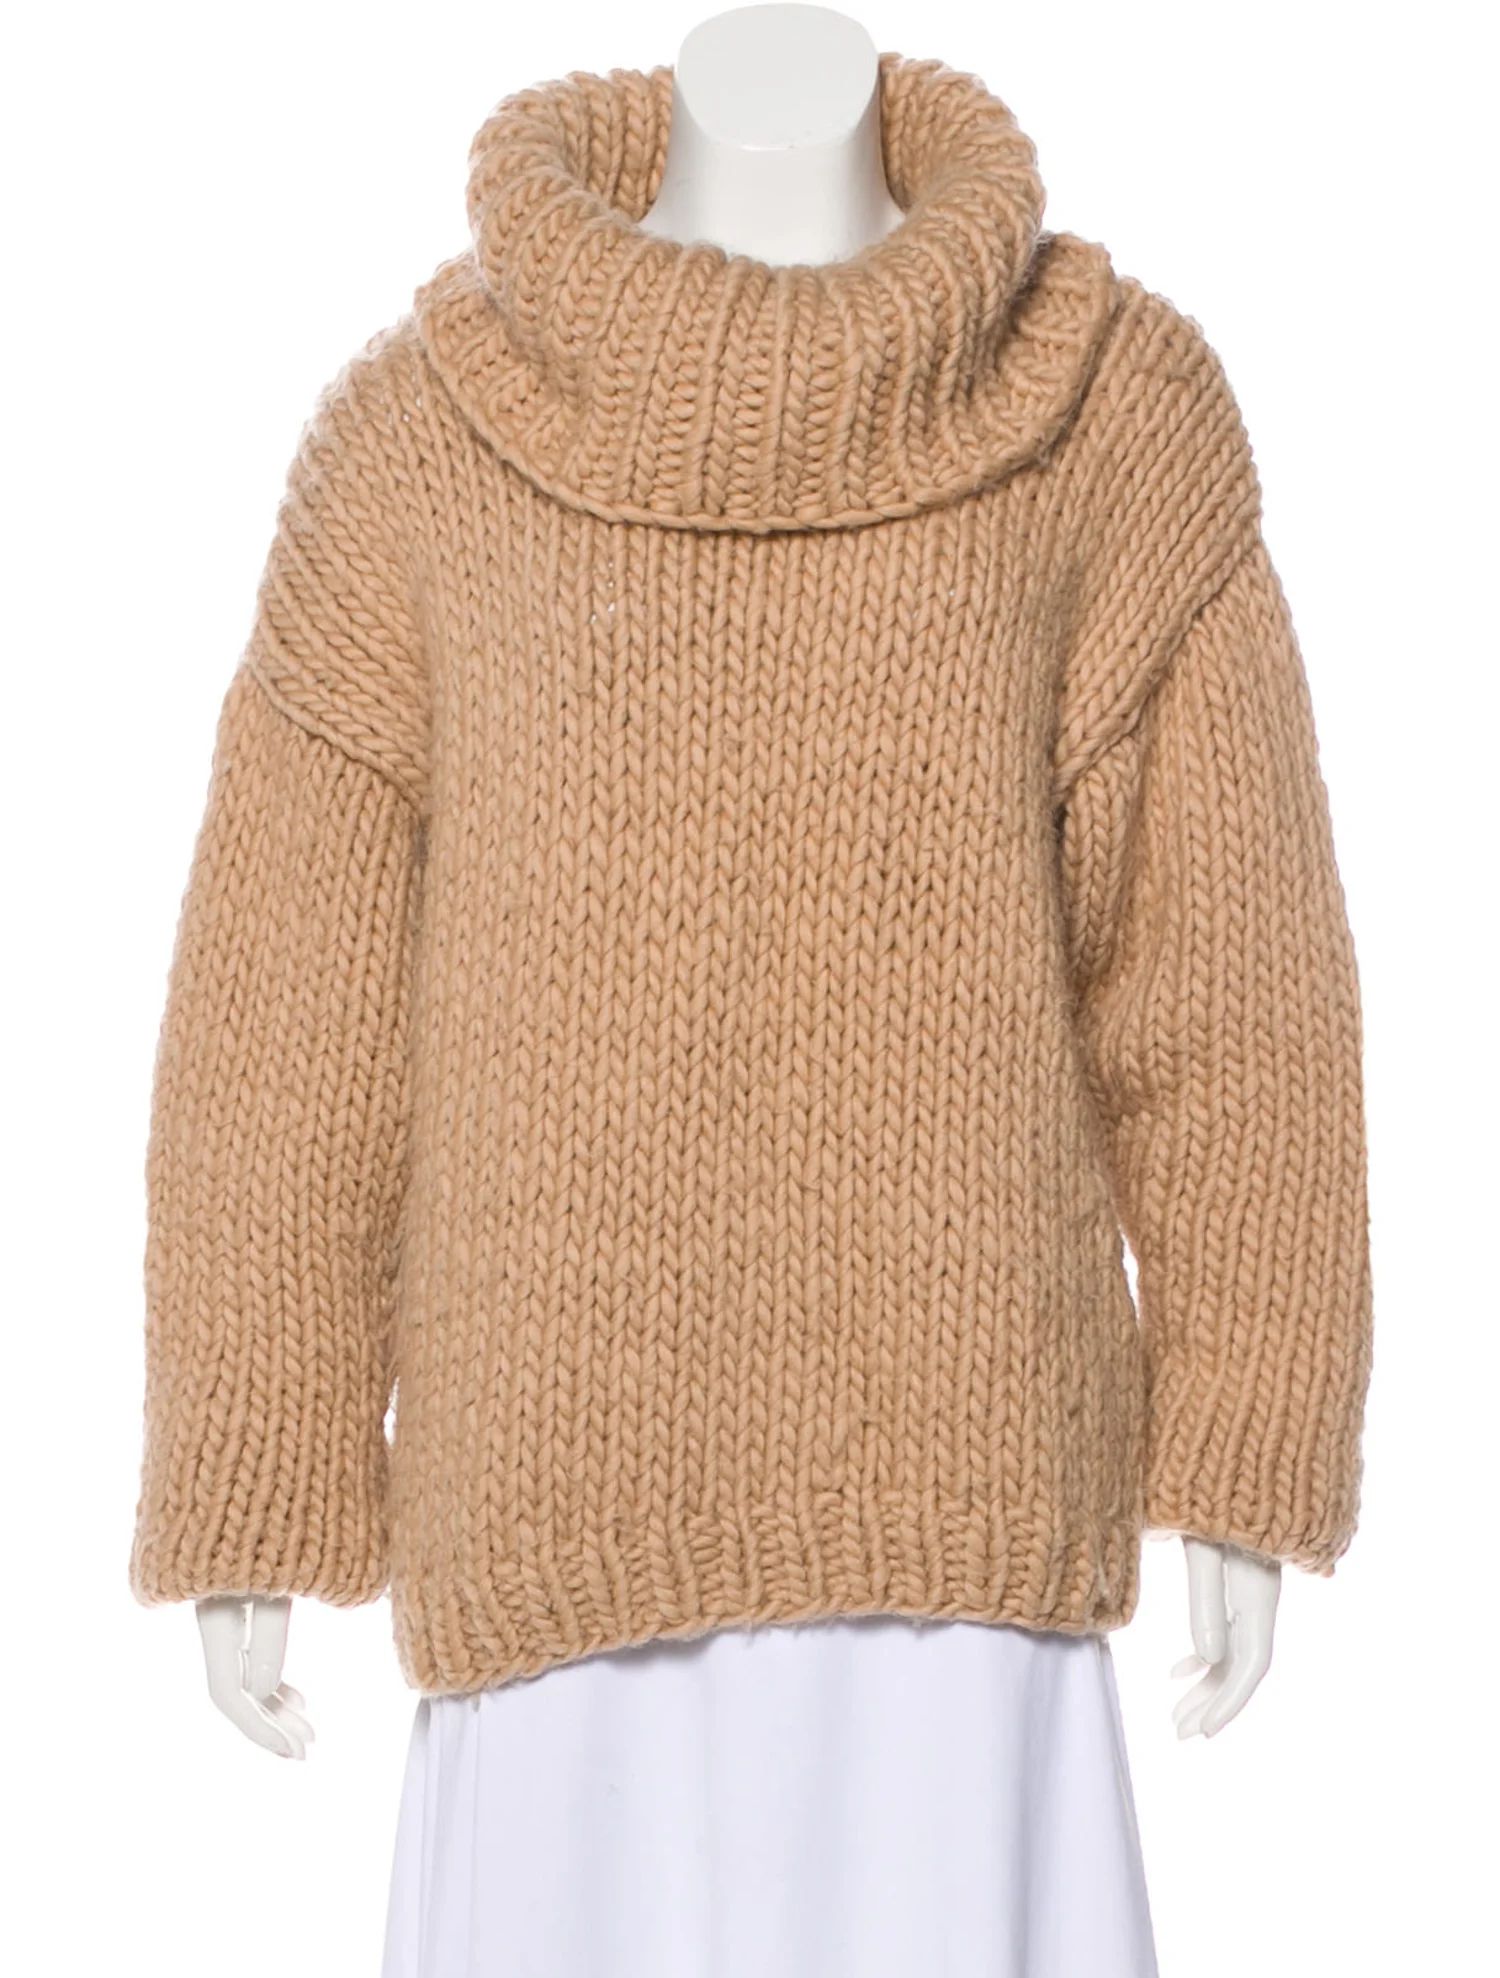 Wool Heavy Sweater | The RealReal